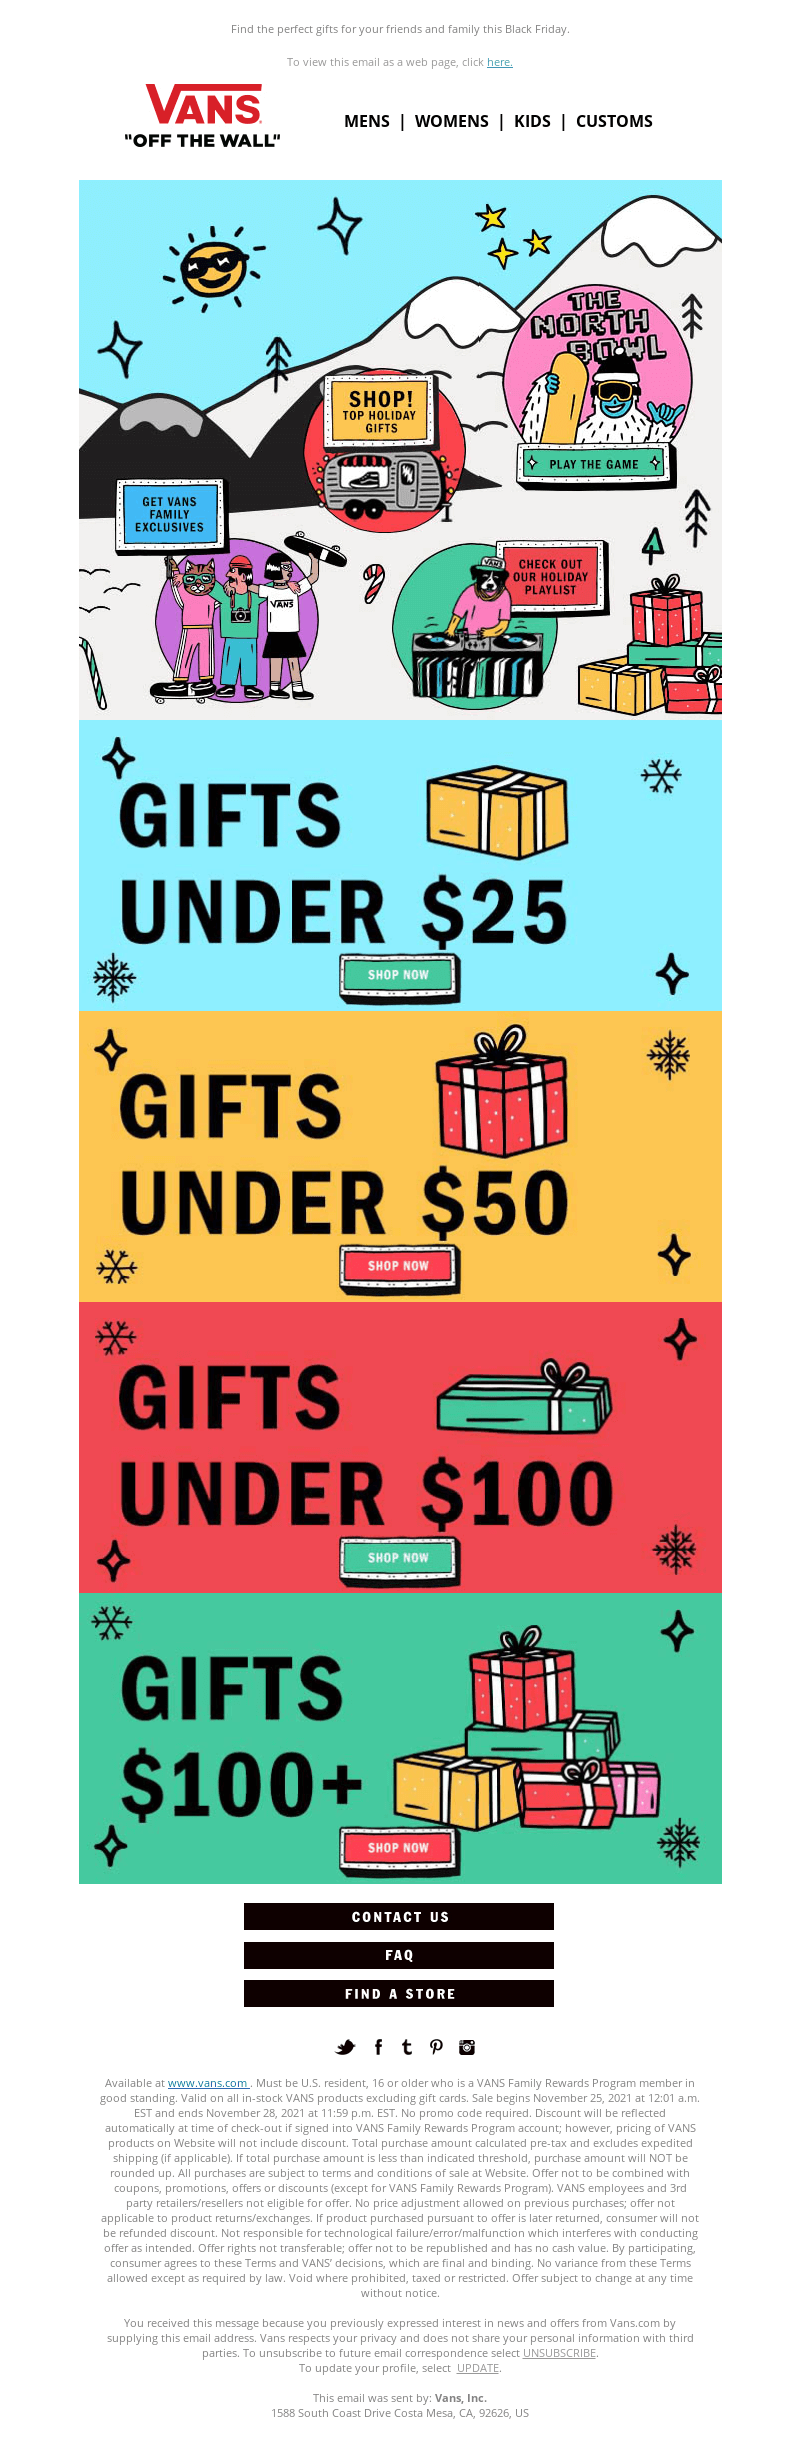 Black Friday email from Vans with a winter holiday design and different buttons for different price points’ gifts